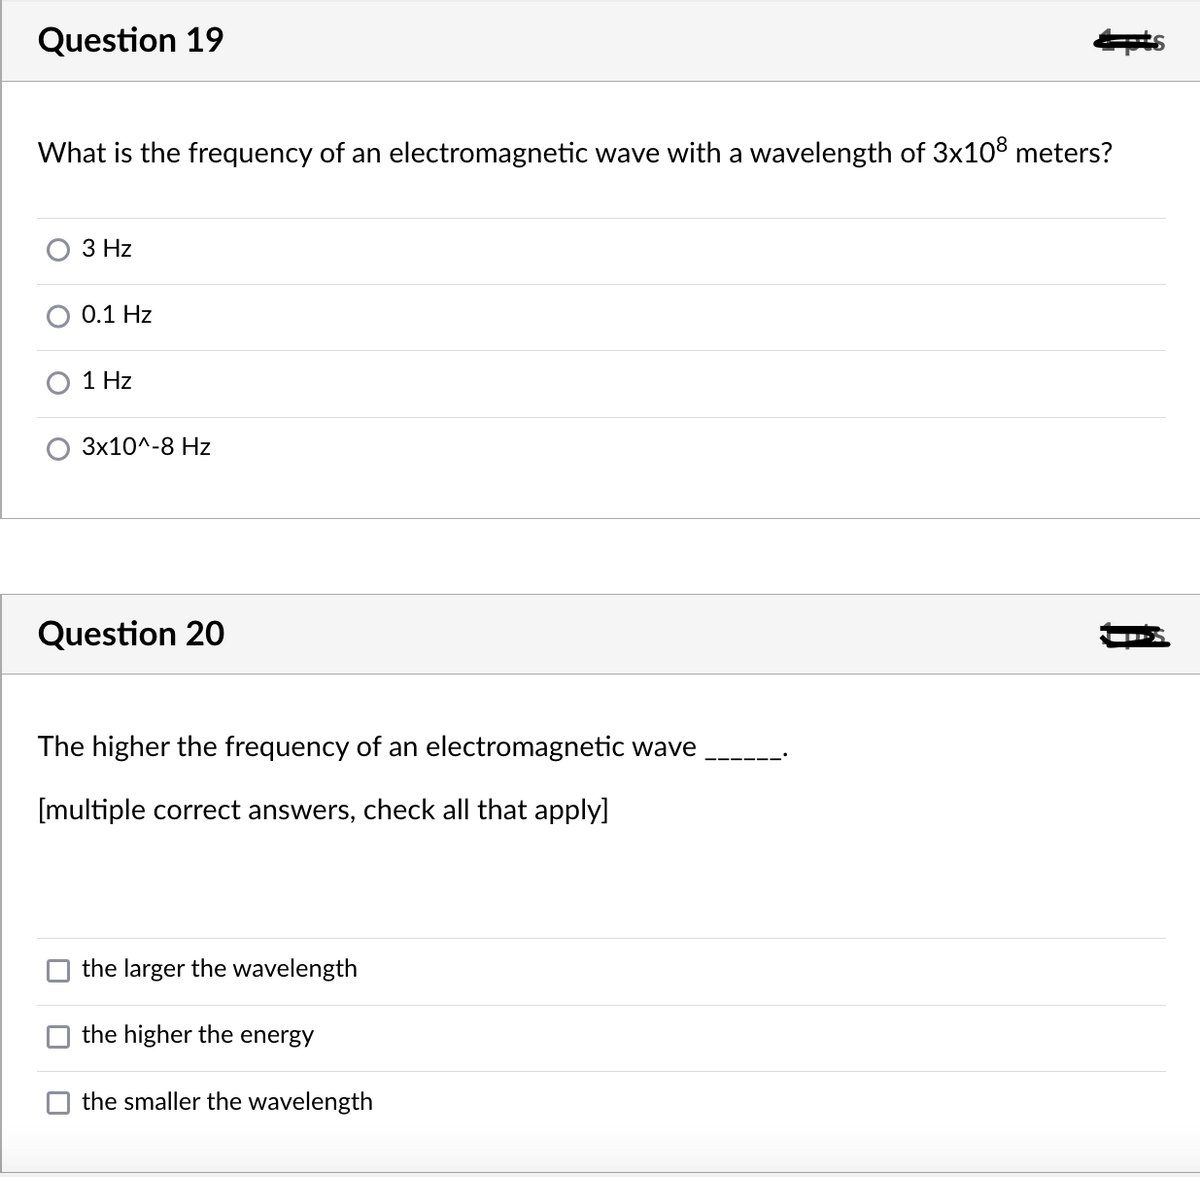 Question 19
What is the frequency of an electromagnetic wave with a wavelength of 3x108 meters?
3 Hz
0.1 Hz
1 Hz
3x10^-8 Hz
Question 20
The higher the frequency of an electromagnetic wave
[multiple correct answers, check all that apply]
the larger the wavelength
the higher the energy
the smaller the wavelength
